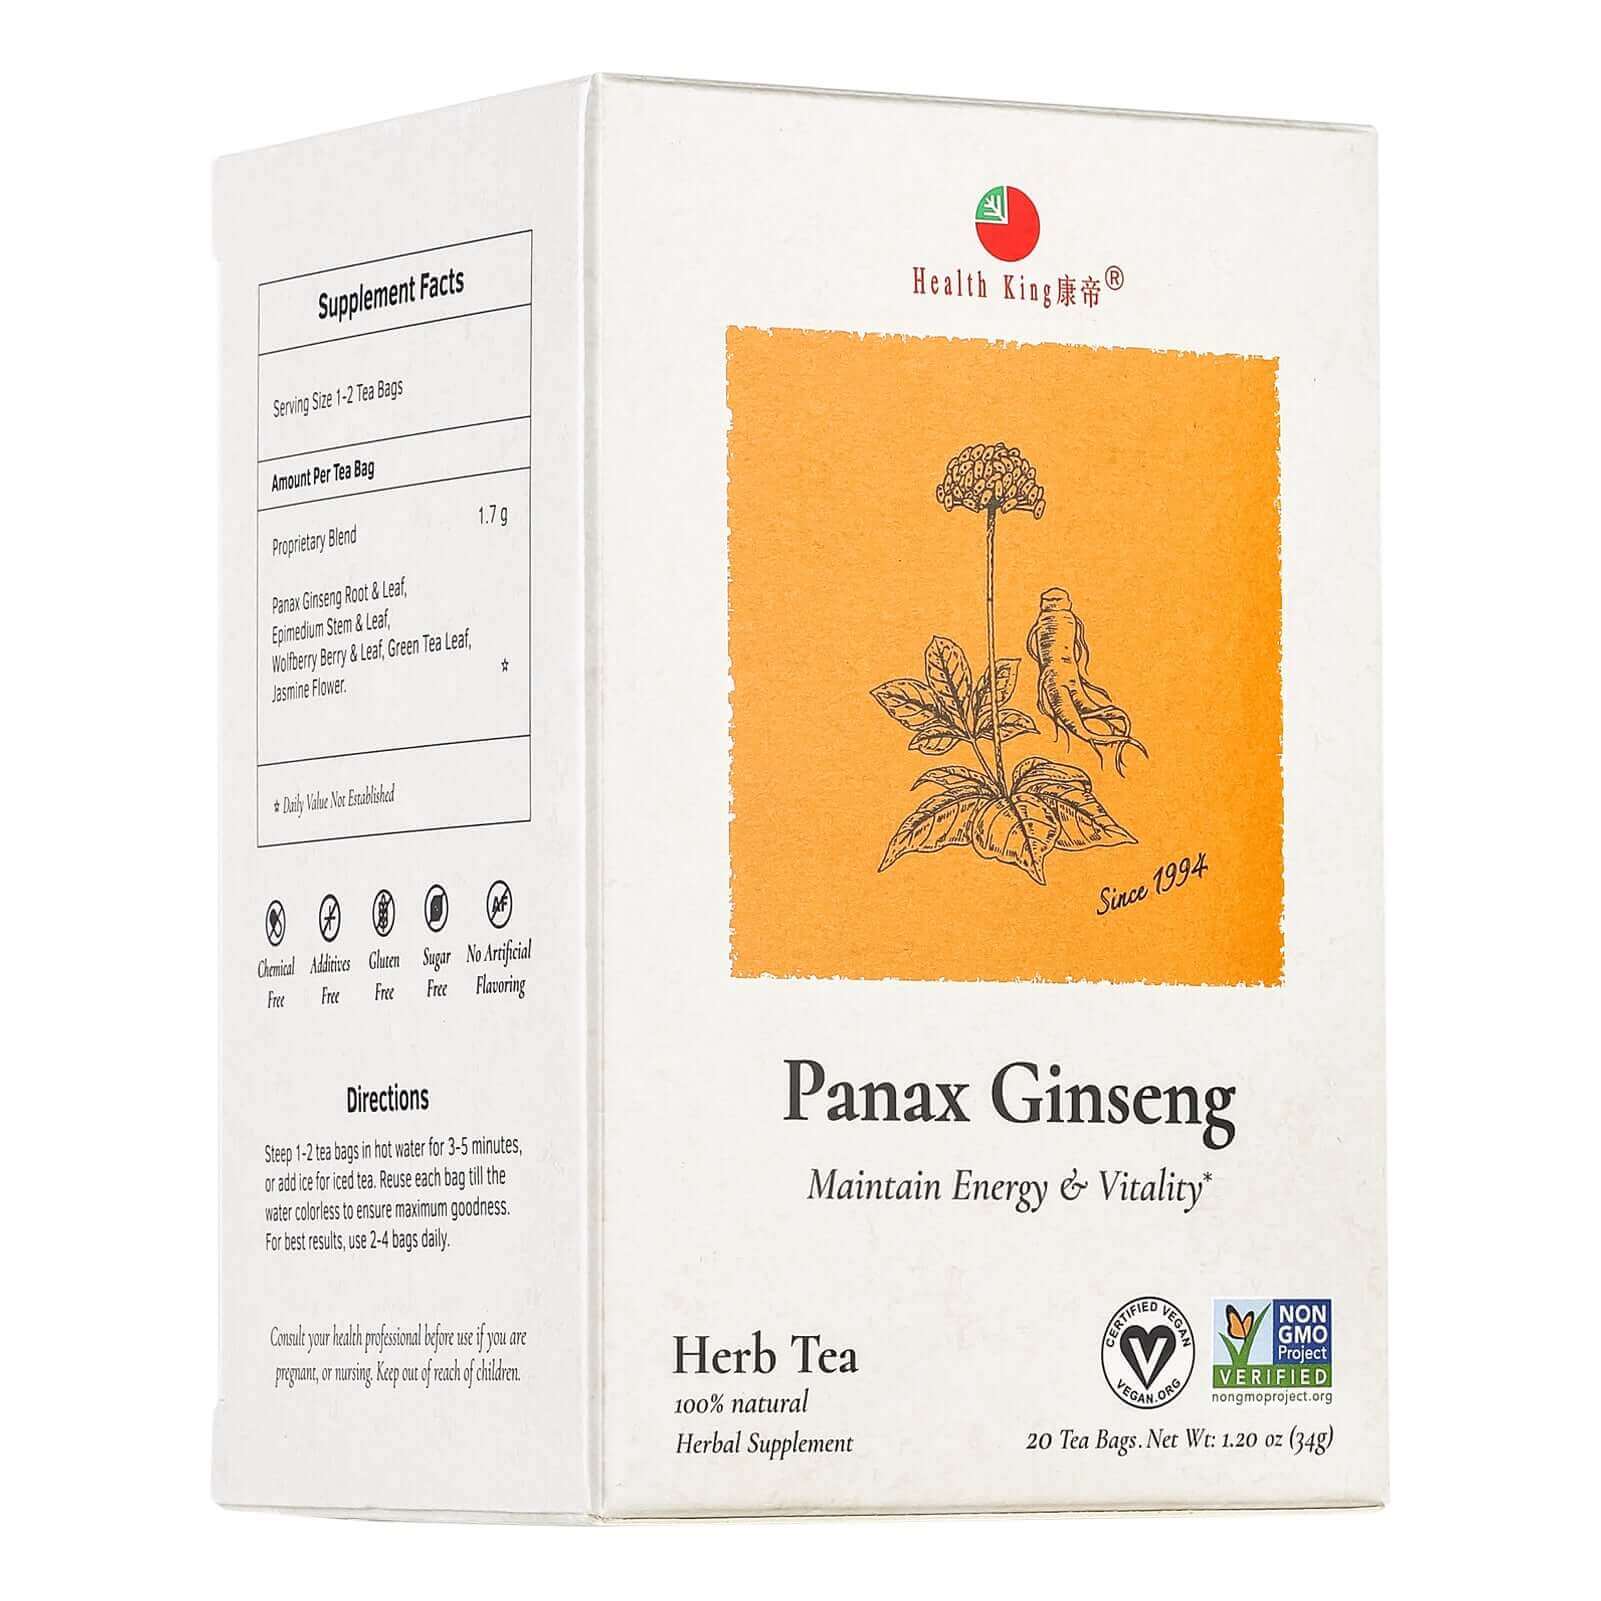 High-quality Panax Ginseng Herb Tea packets for enhancing male vitality